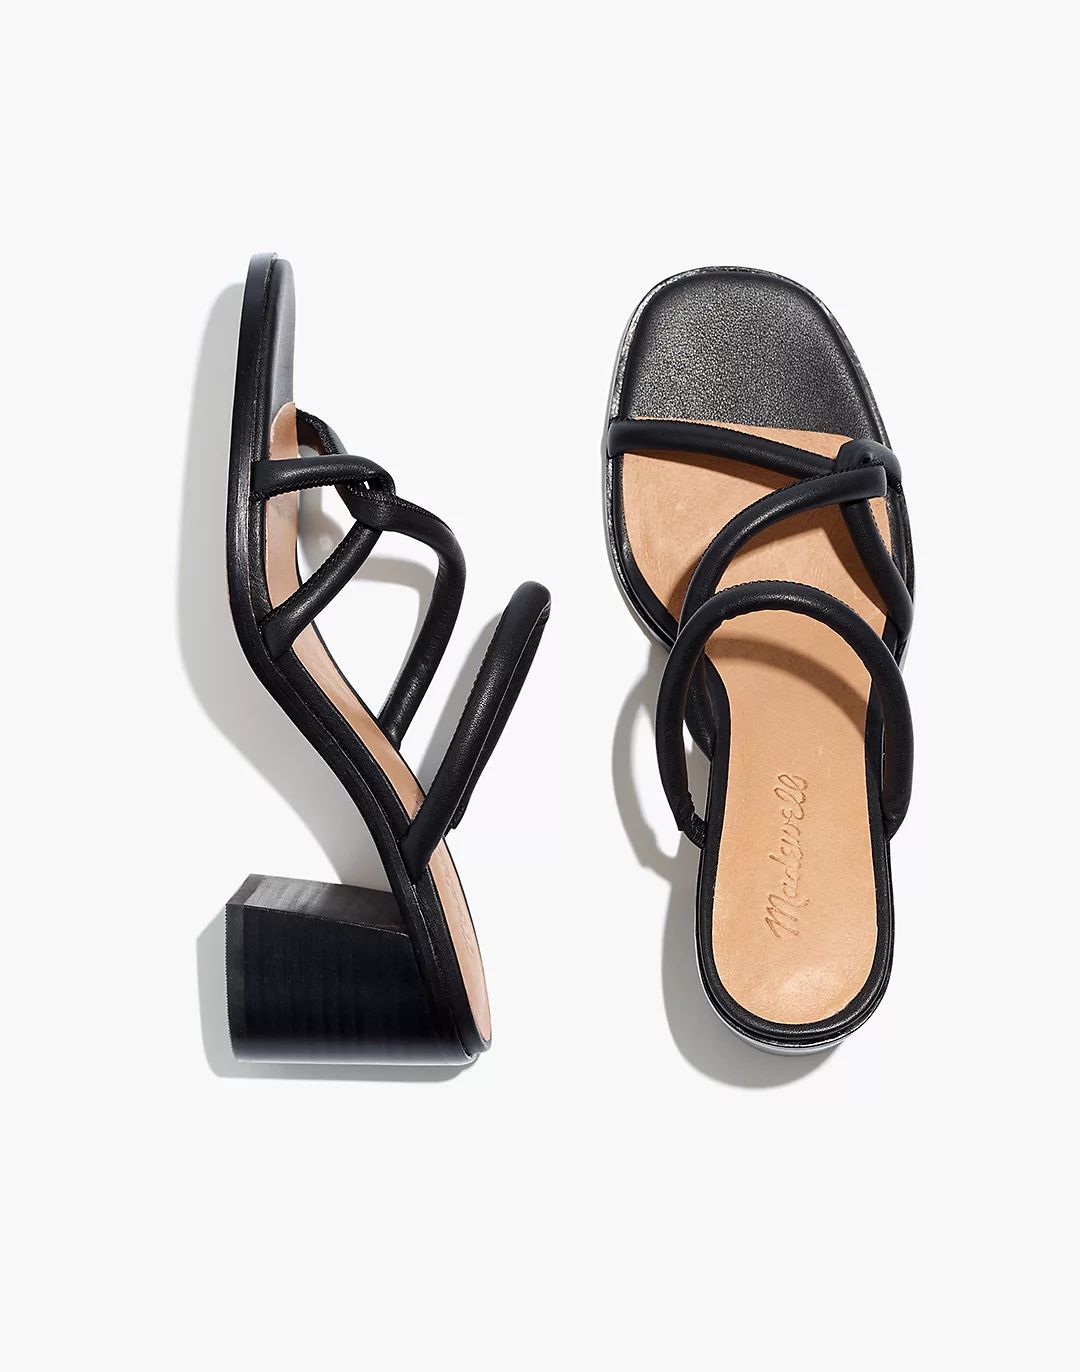 The Tayla Sandal in Leather | Madewell